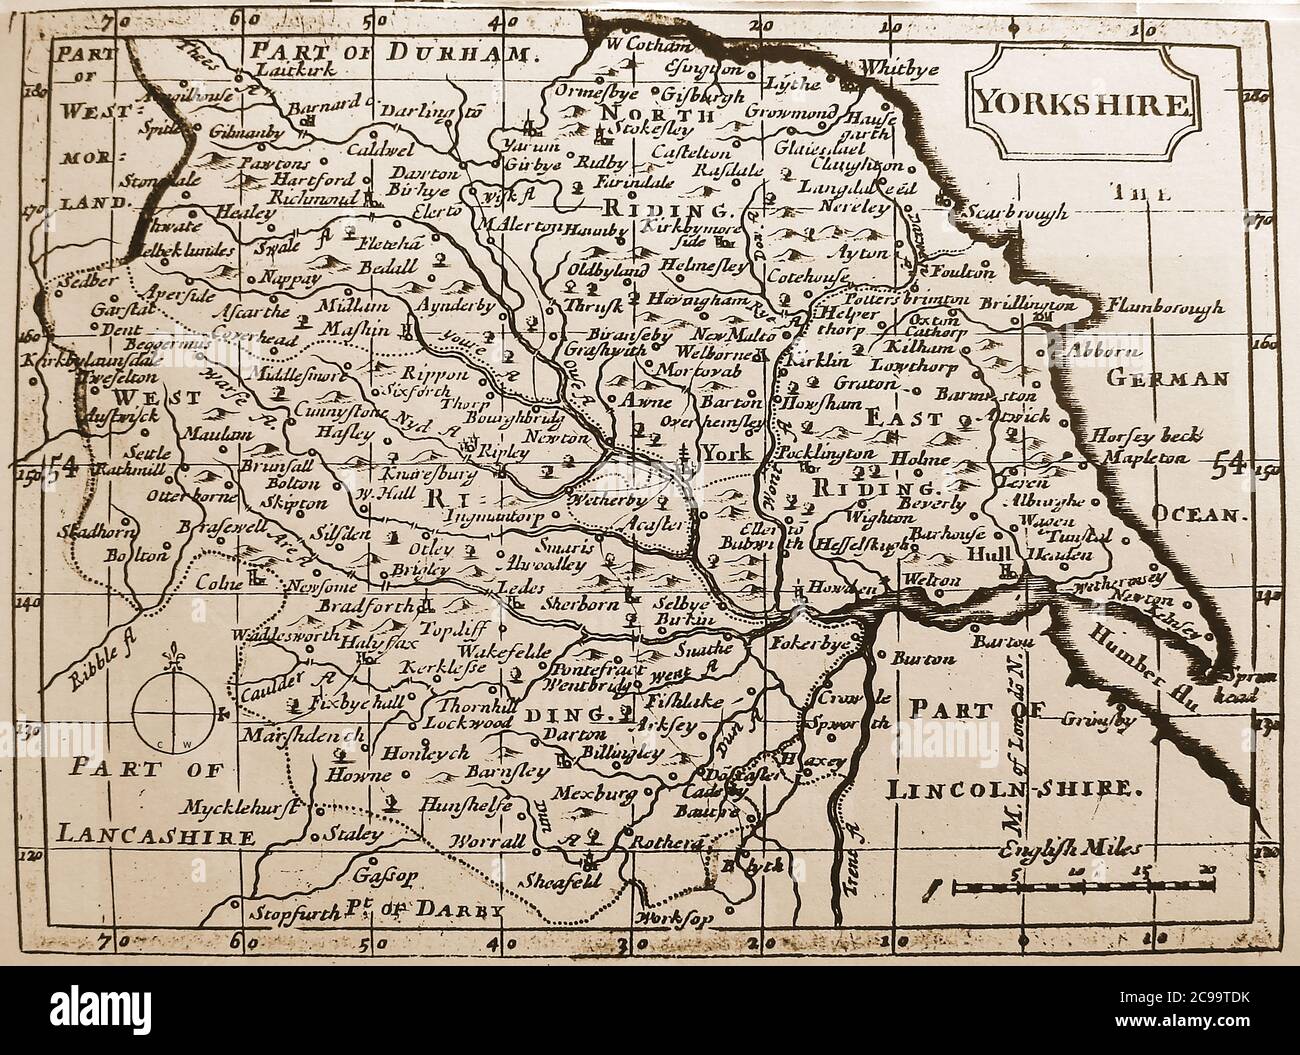 An ancient map of Yorkshire (1778) showing place names as they were spelled at that time. Stock Photo